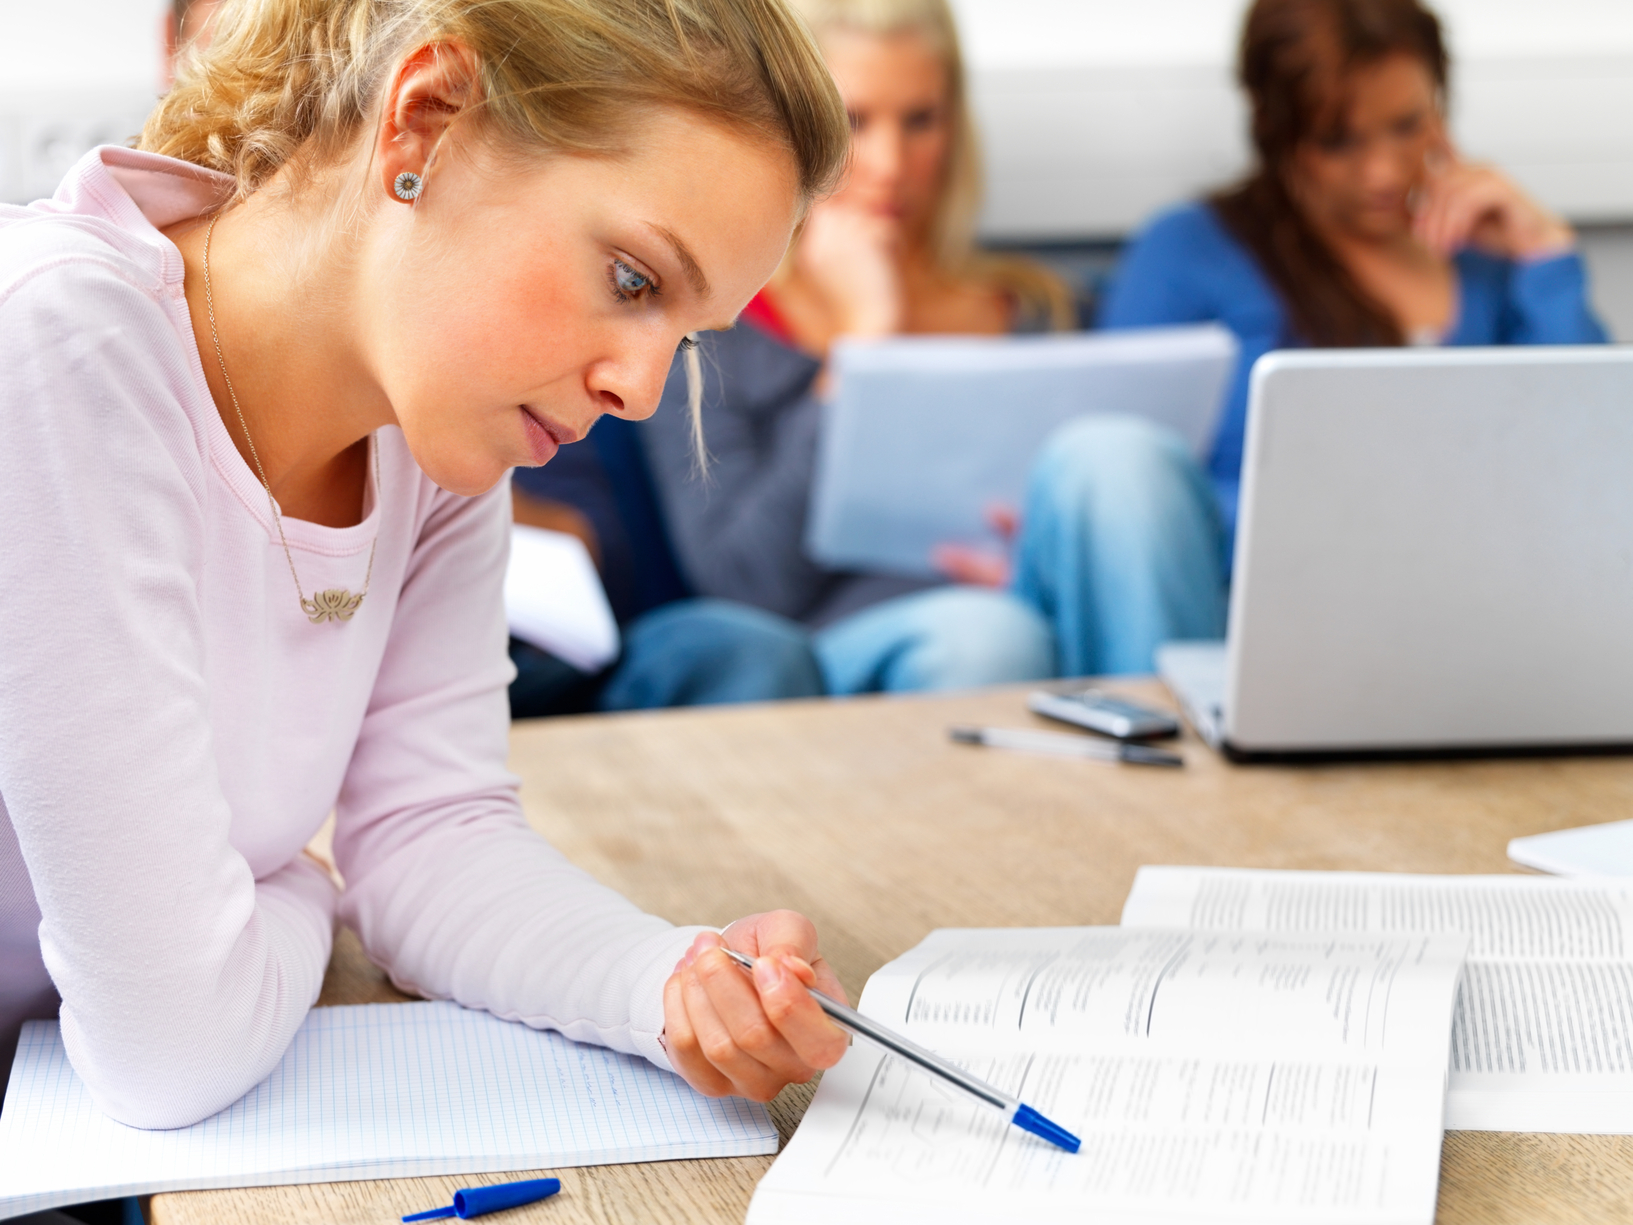 Top 1 Tips for College Admissions Essays - Essay Writing